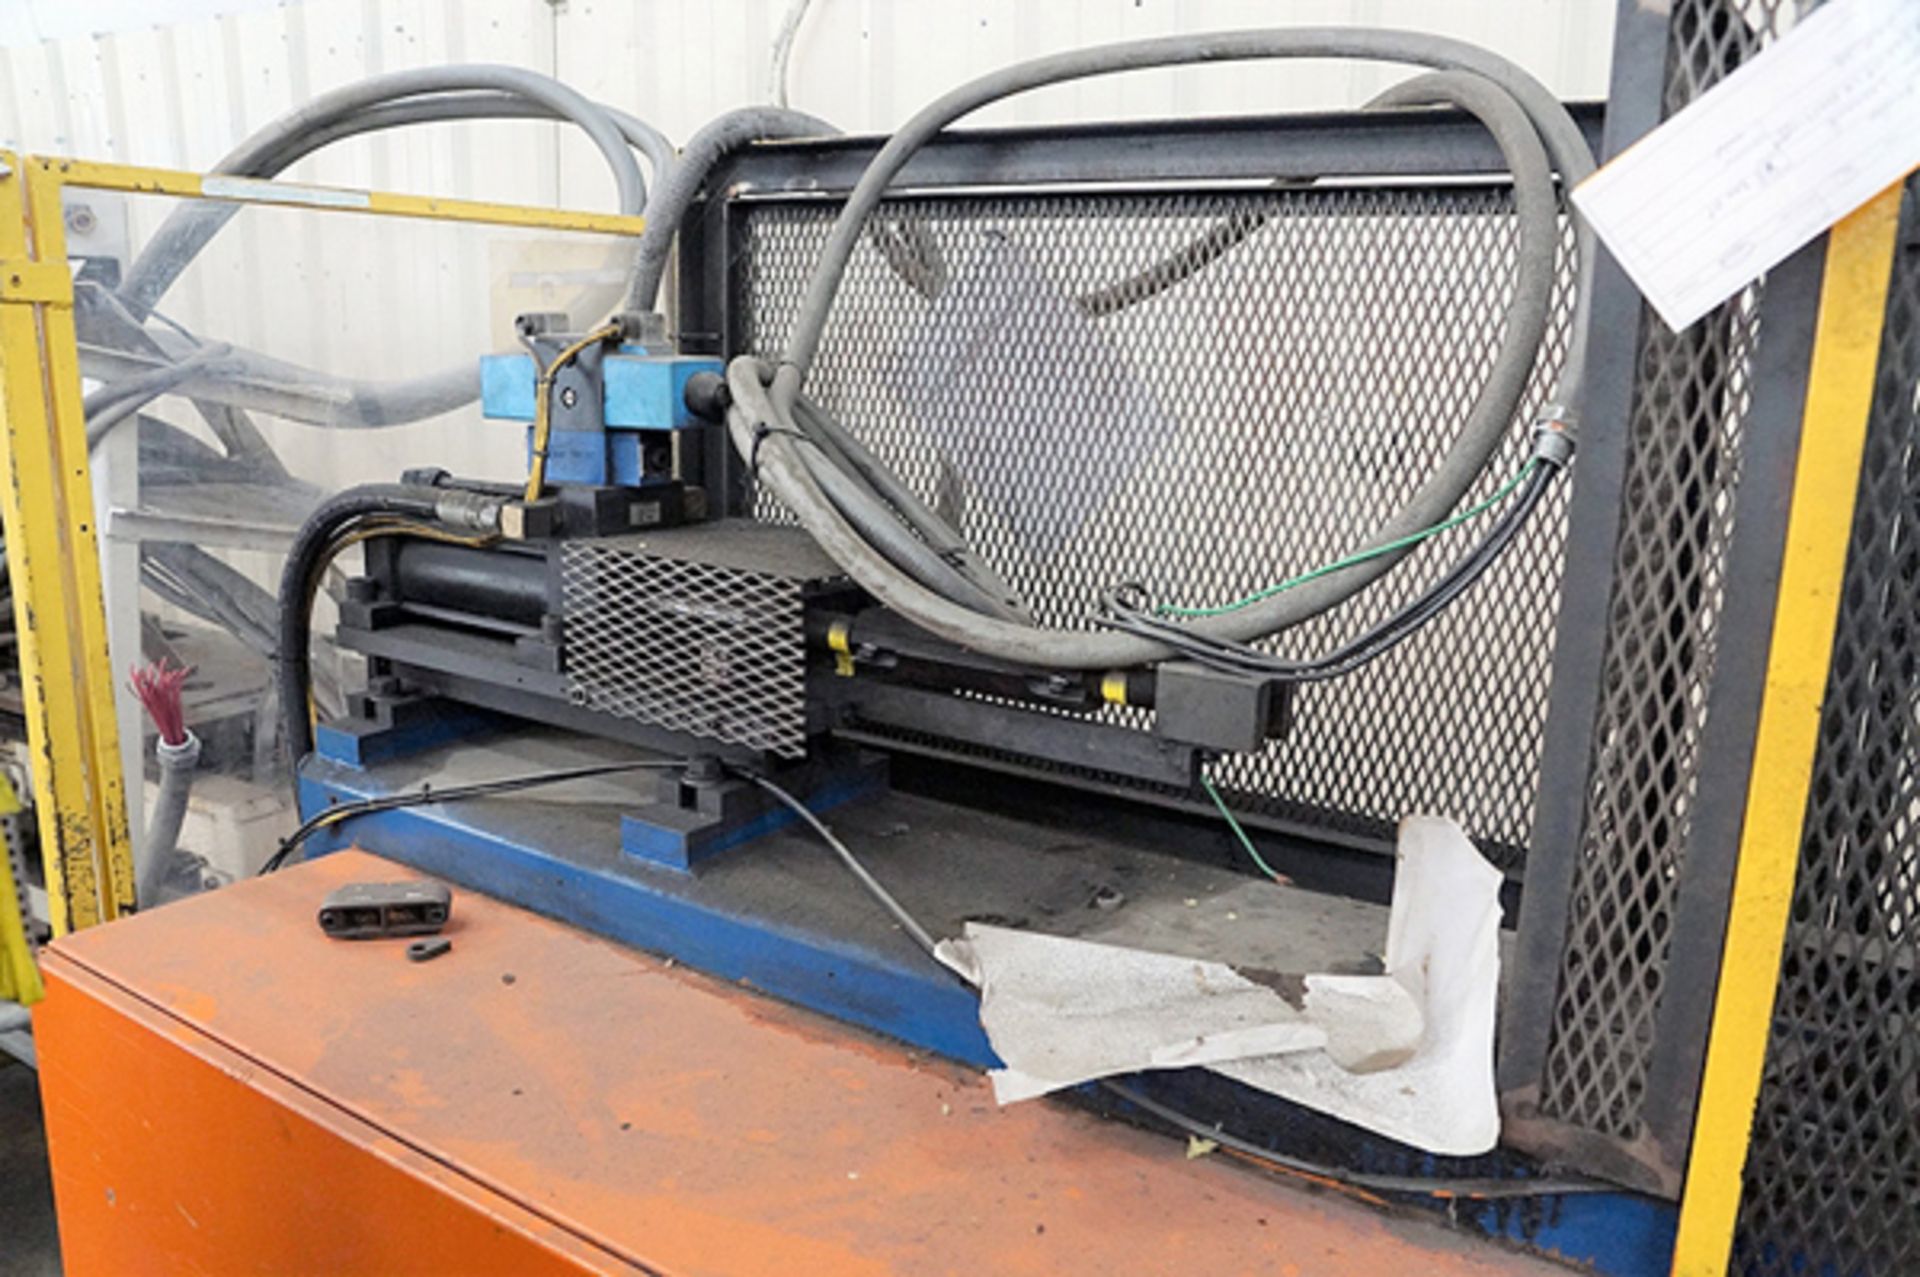 Eaton Leonard CNC Hydraulic Tube & Pipe Bender 2'' x 174''. LOADING FEE FOR THIS LOT: $750 - Image 7 of 11